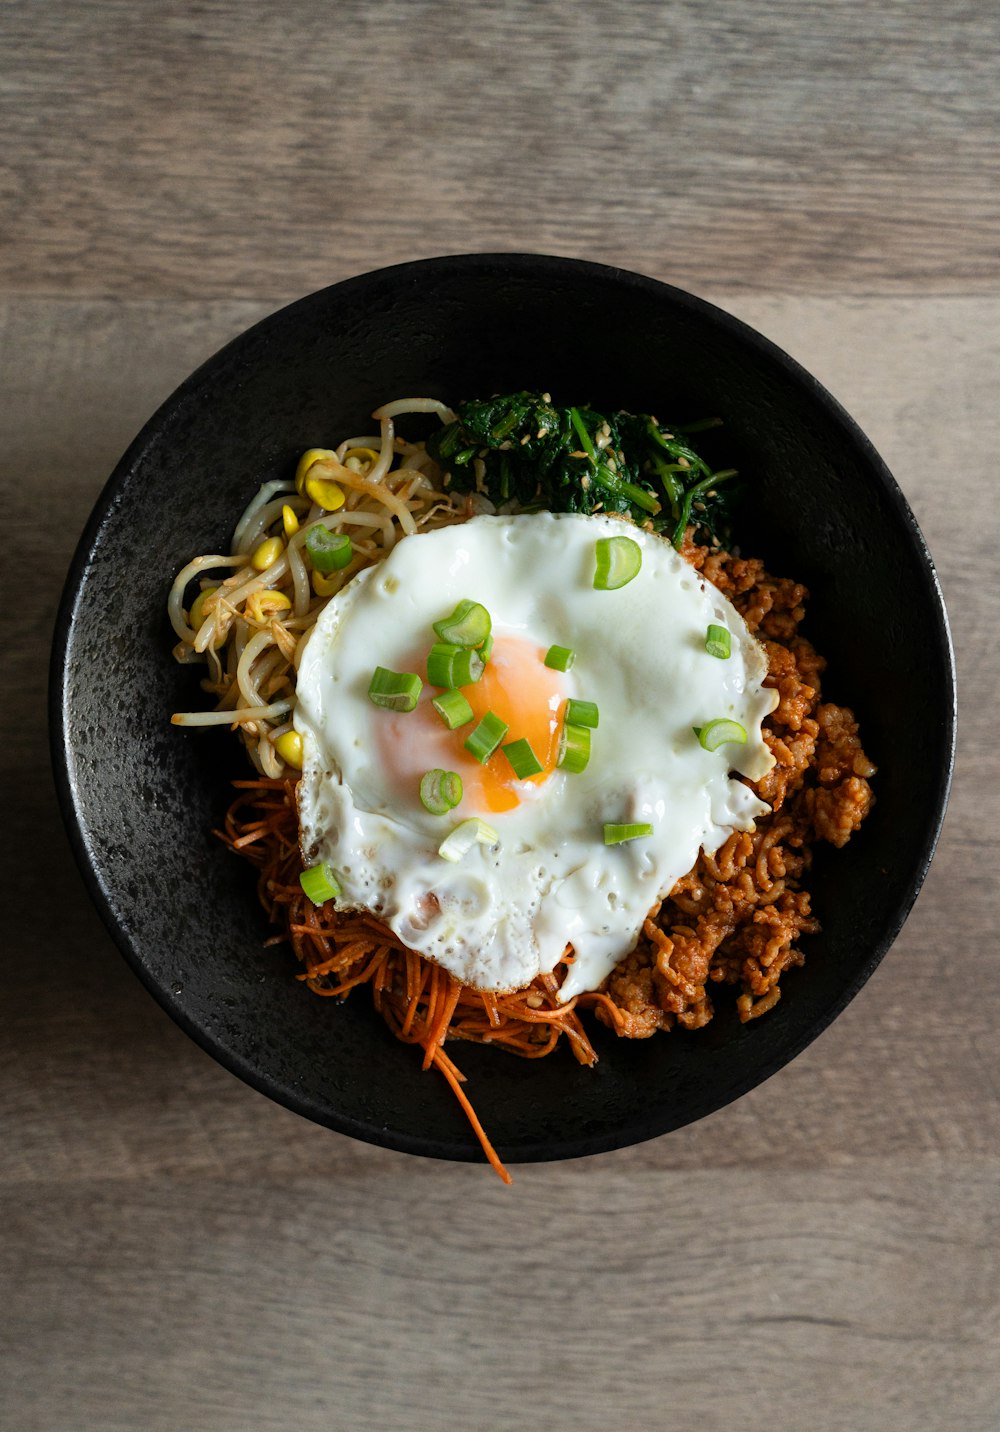 a black bowl filled with noodles and an egg